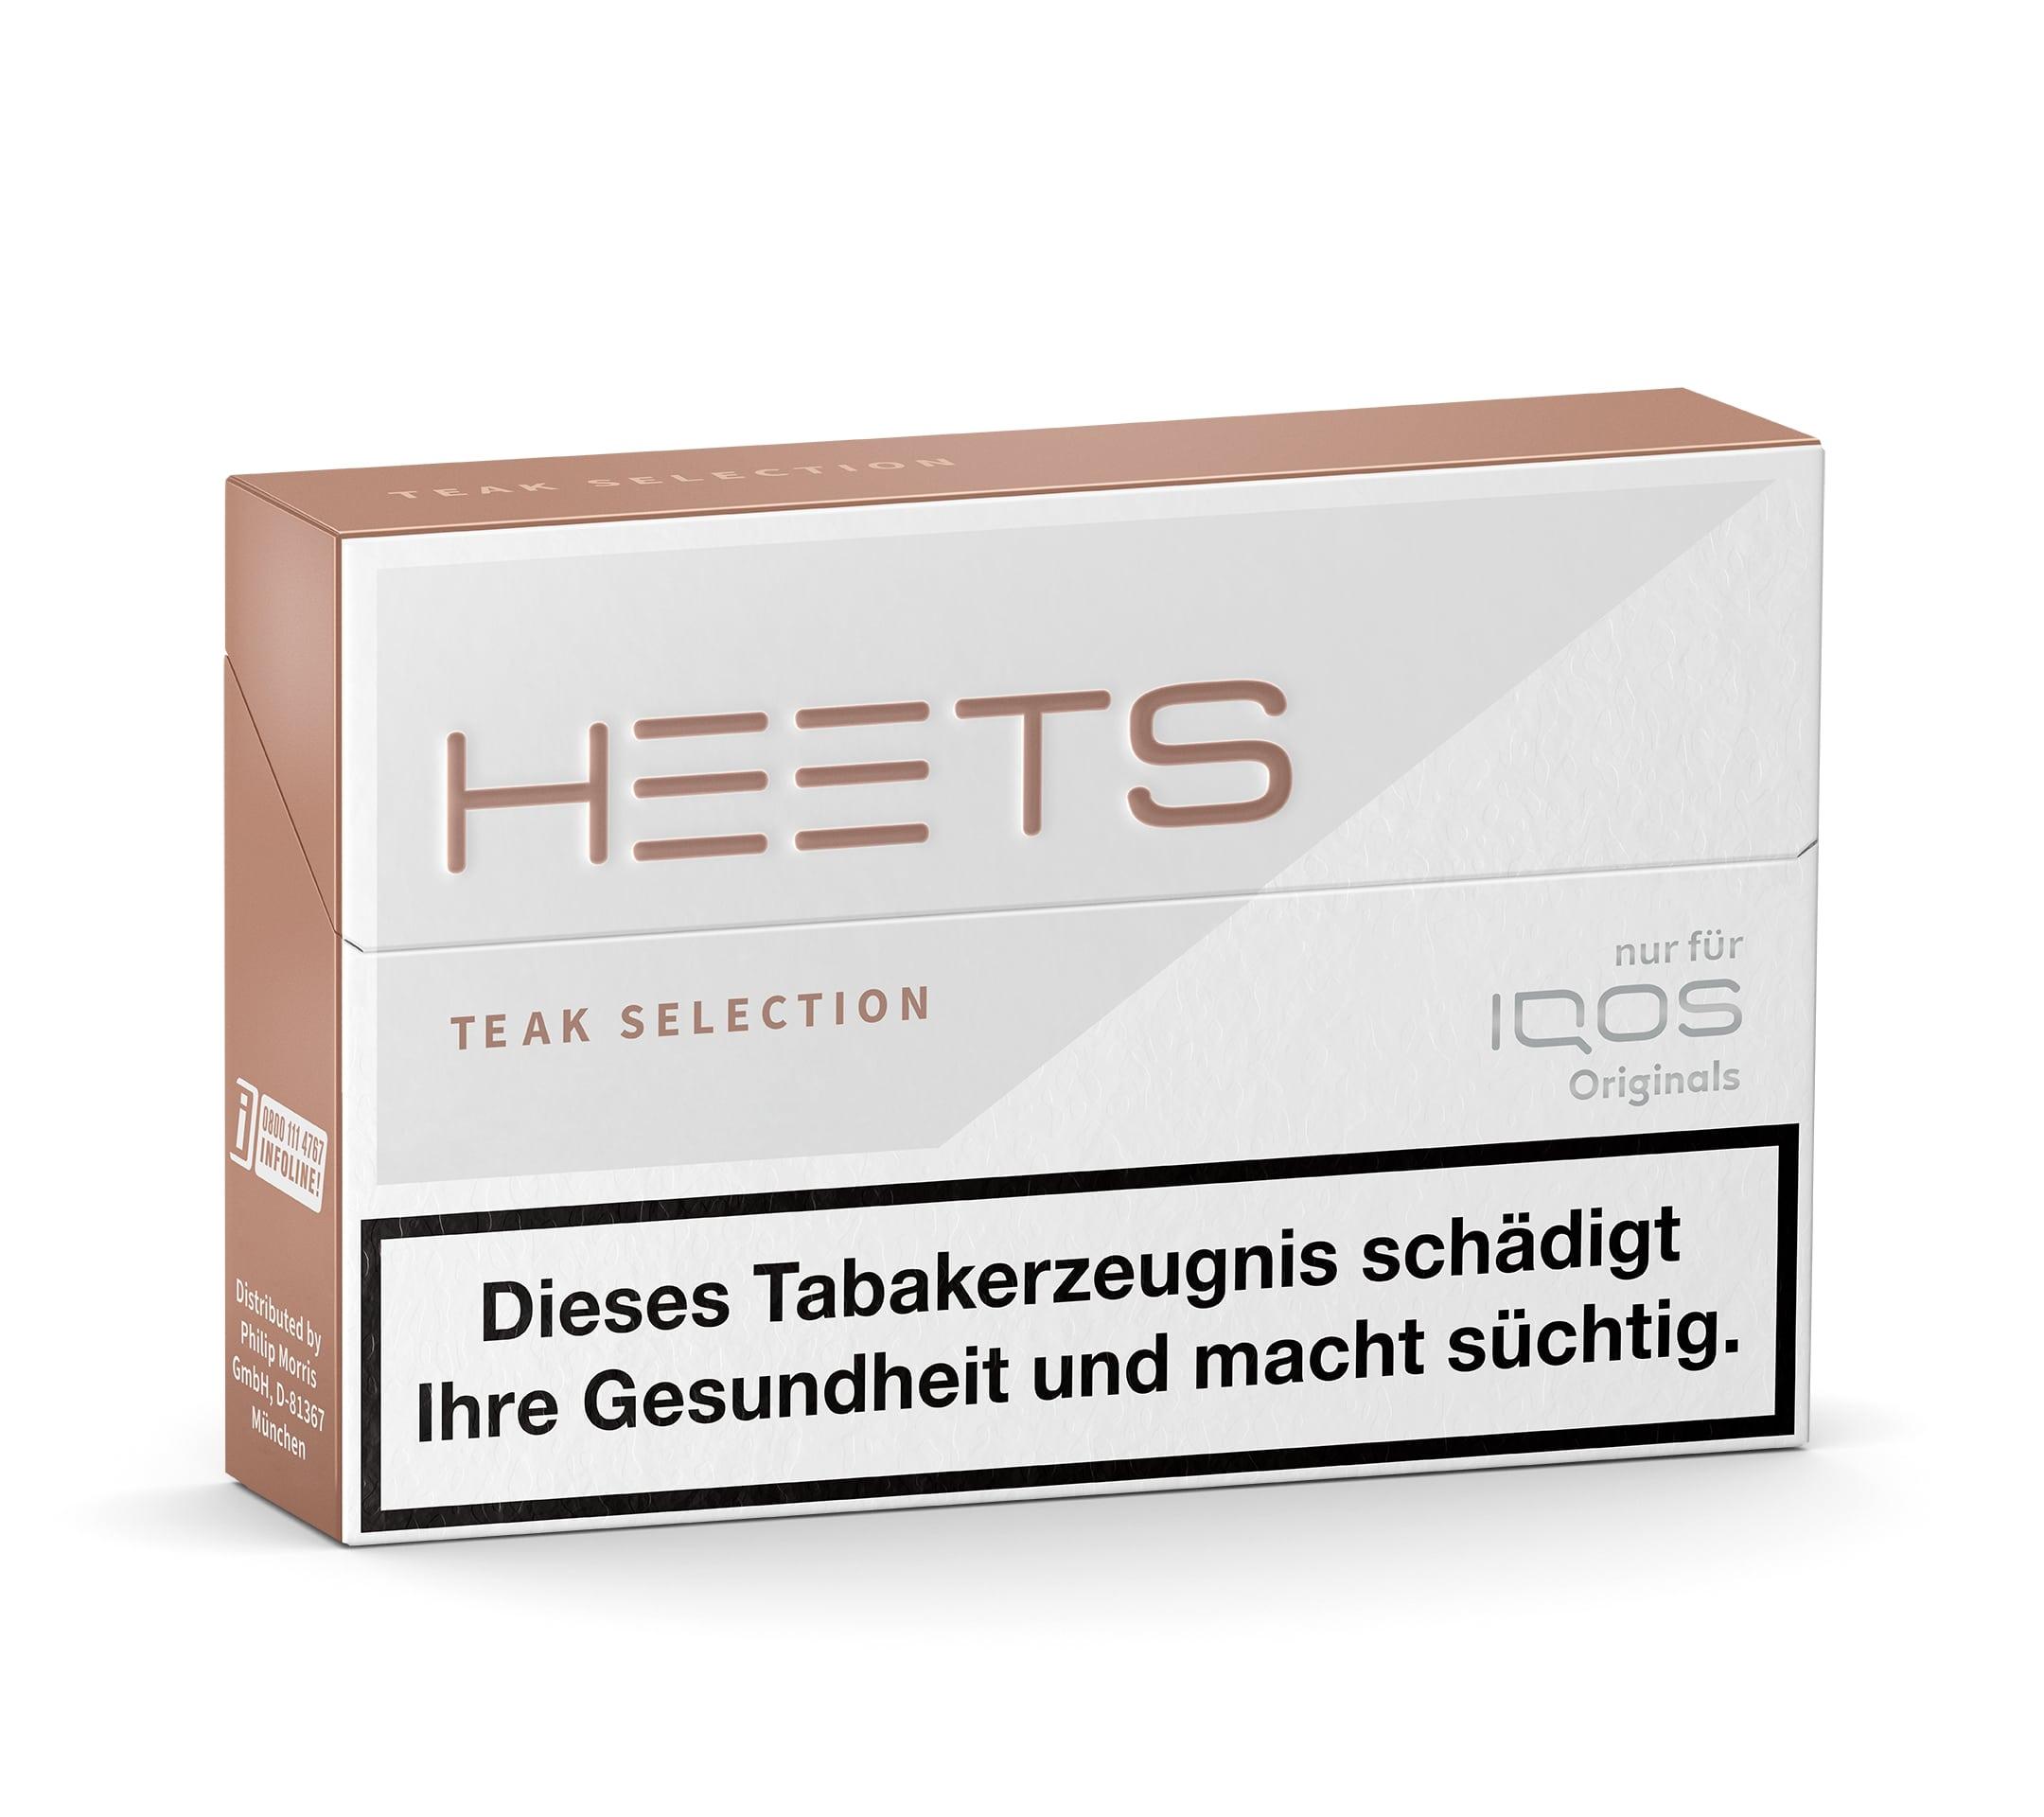 HEETS Teak Selection 1 Packung